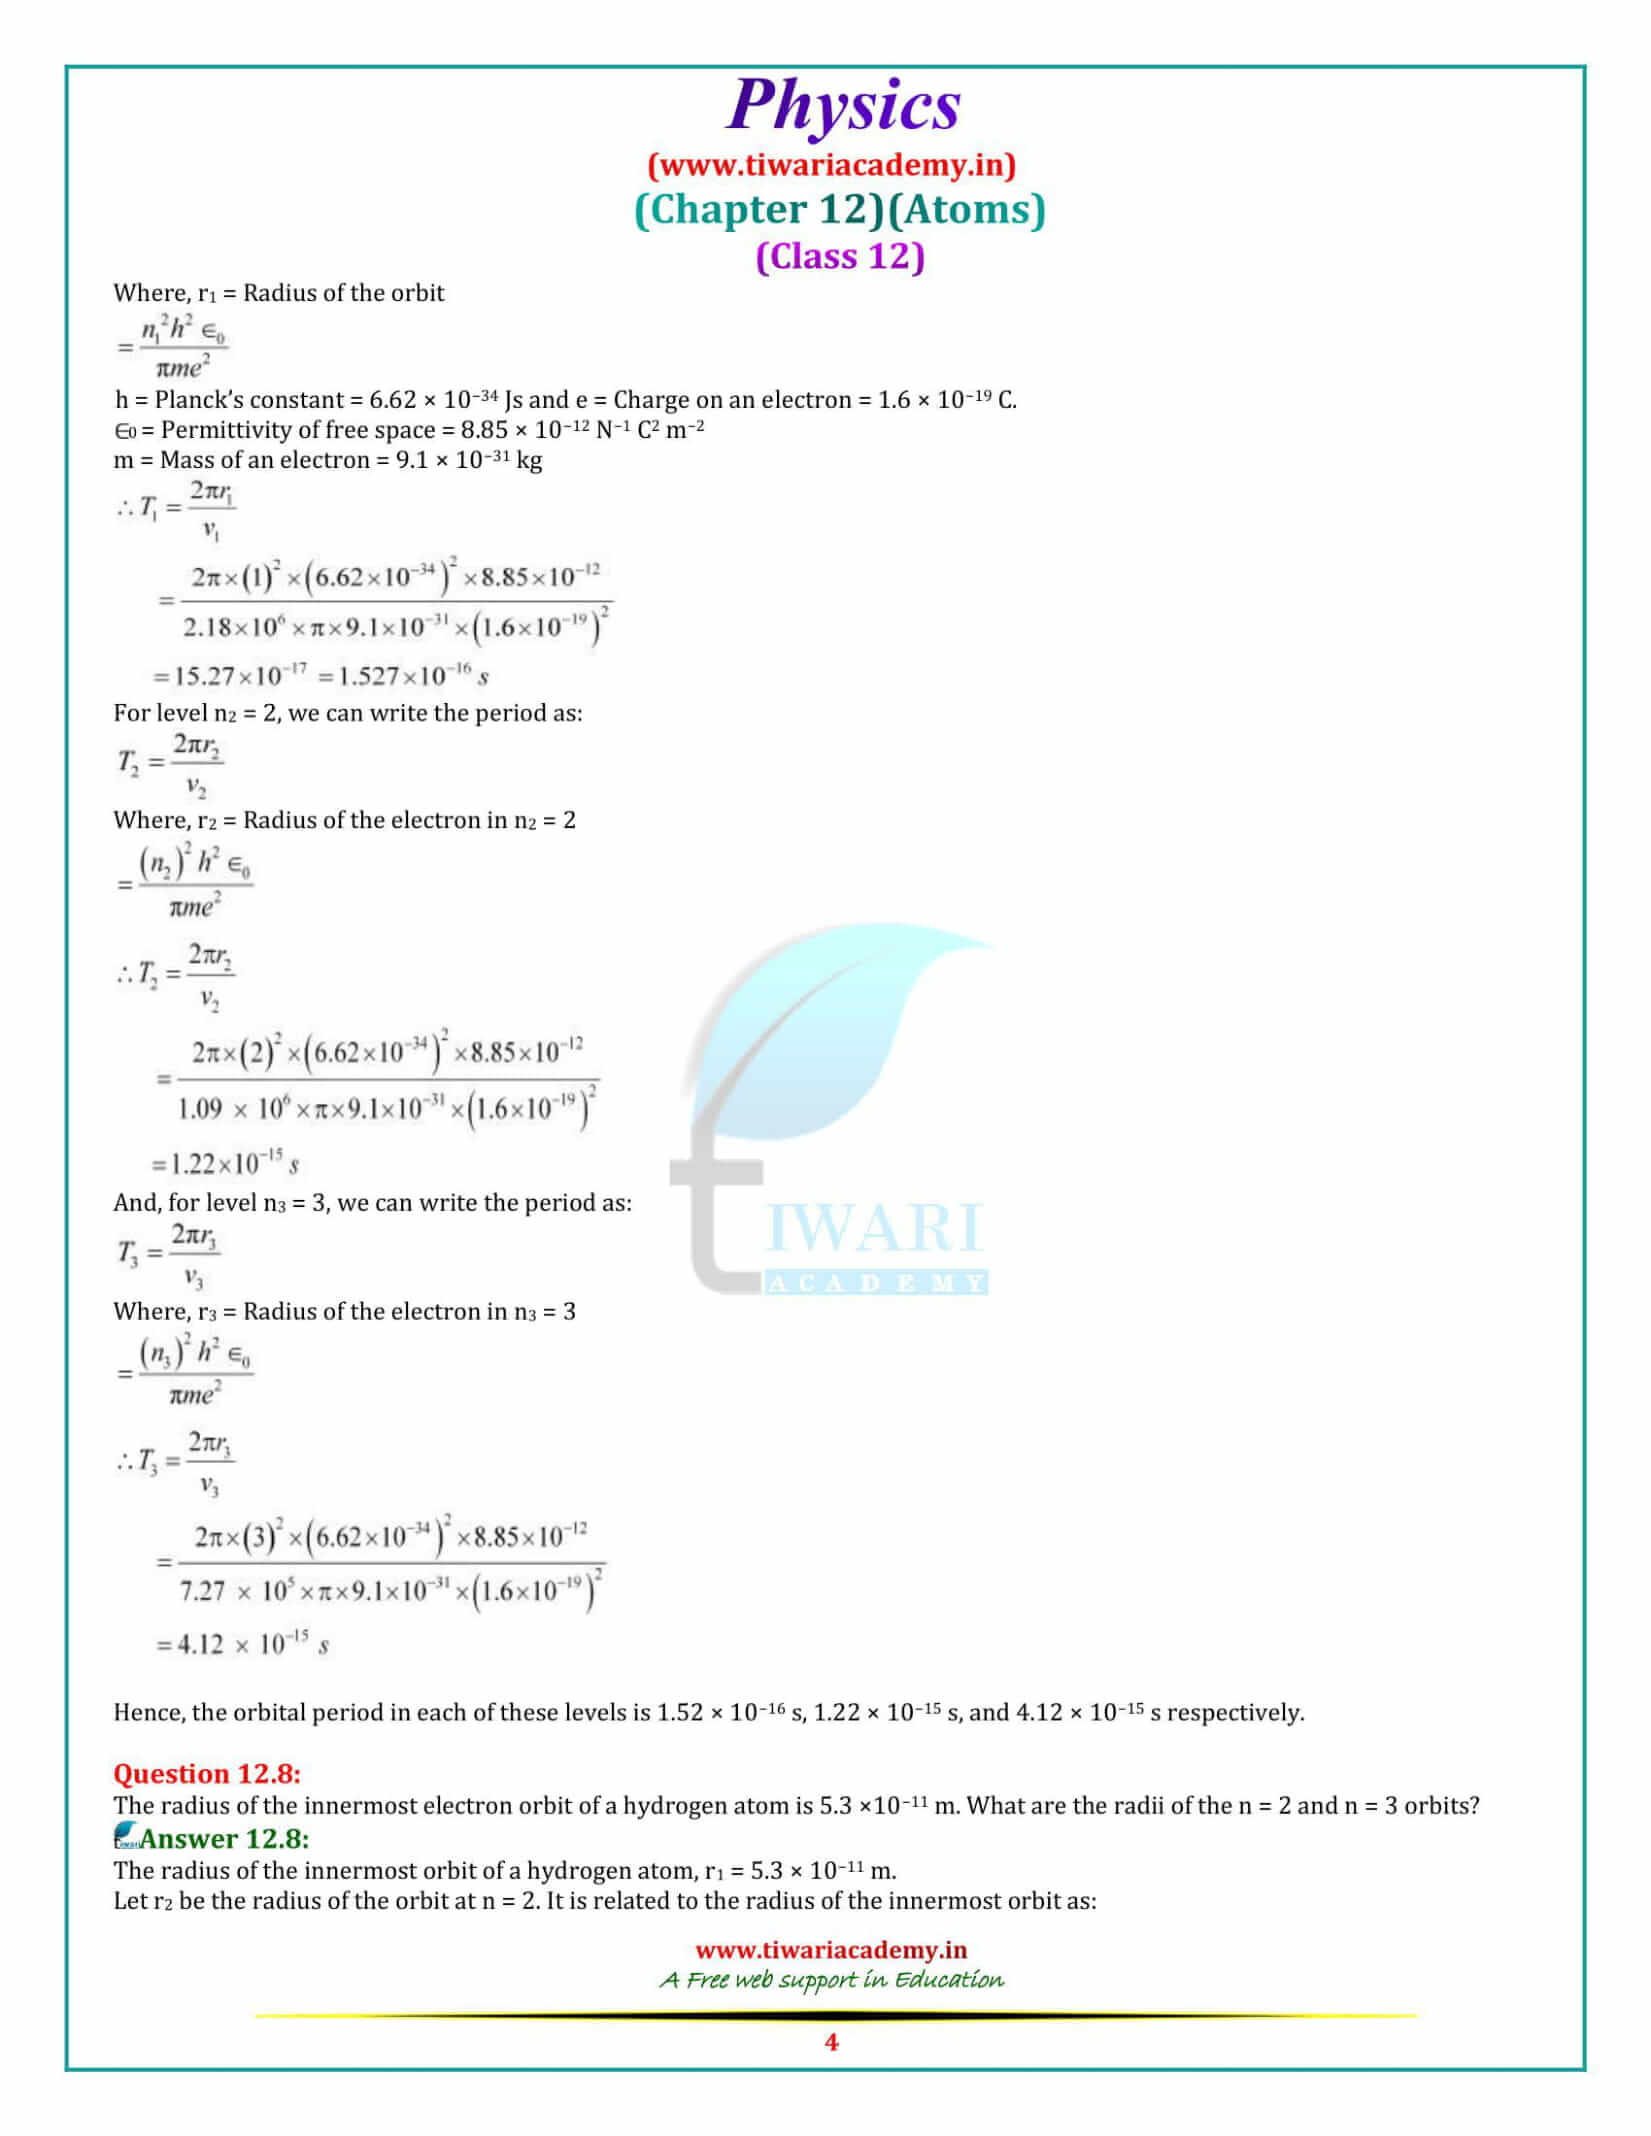 NCERT Solutions for Class 12 Physics Chapter 12 Atom all numerical problems